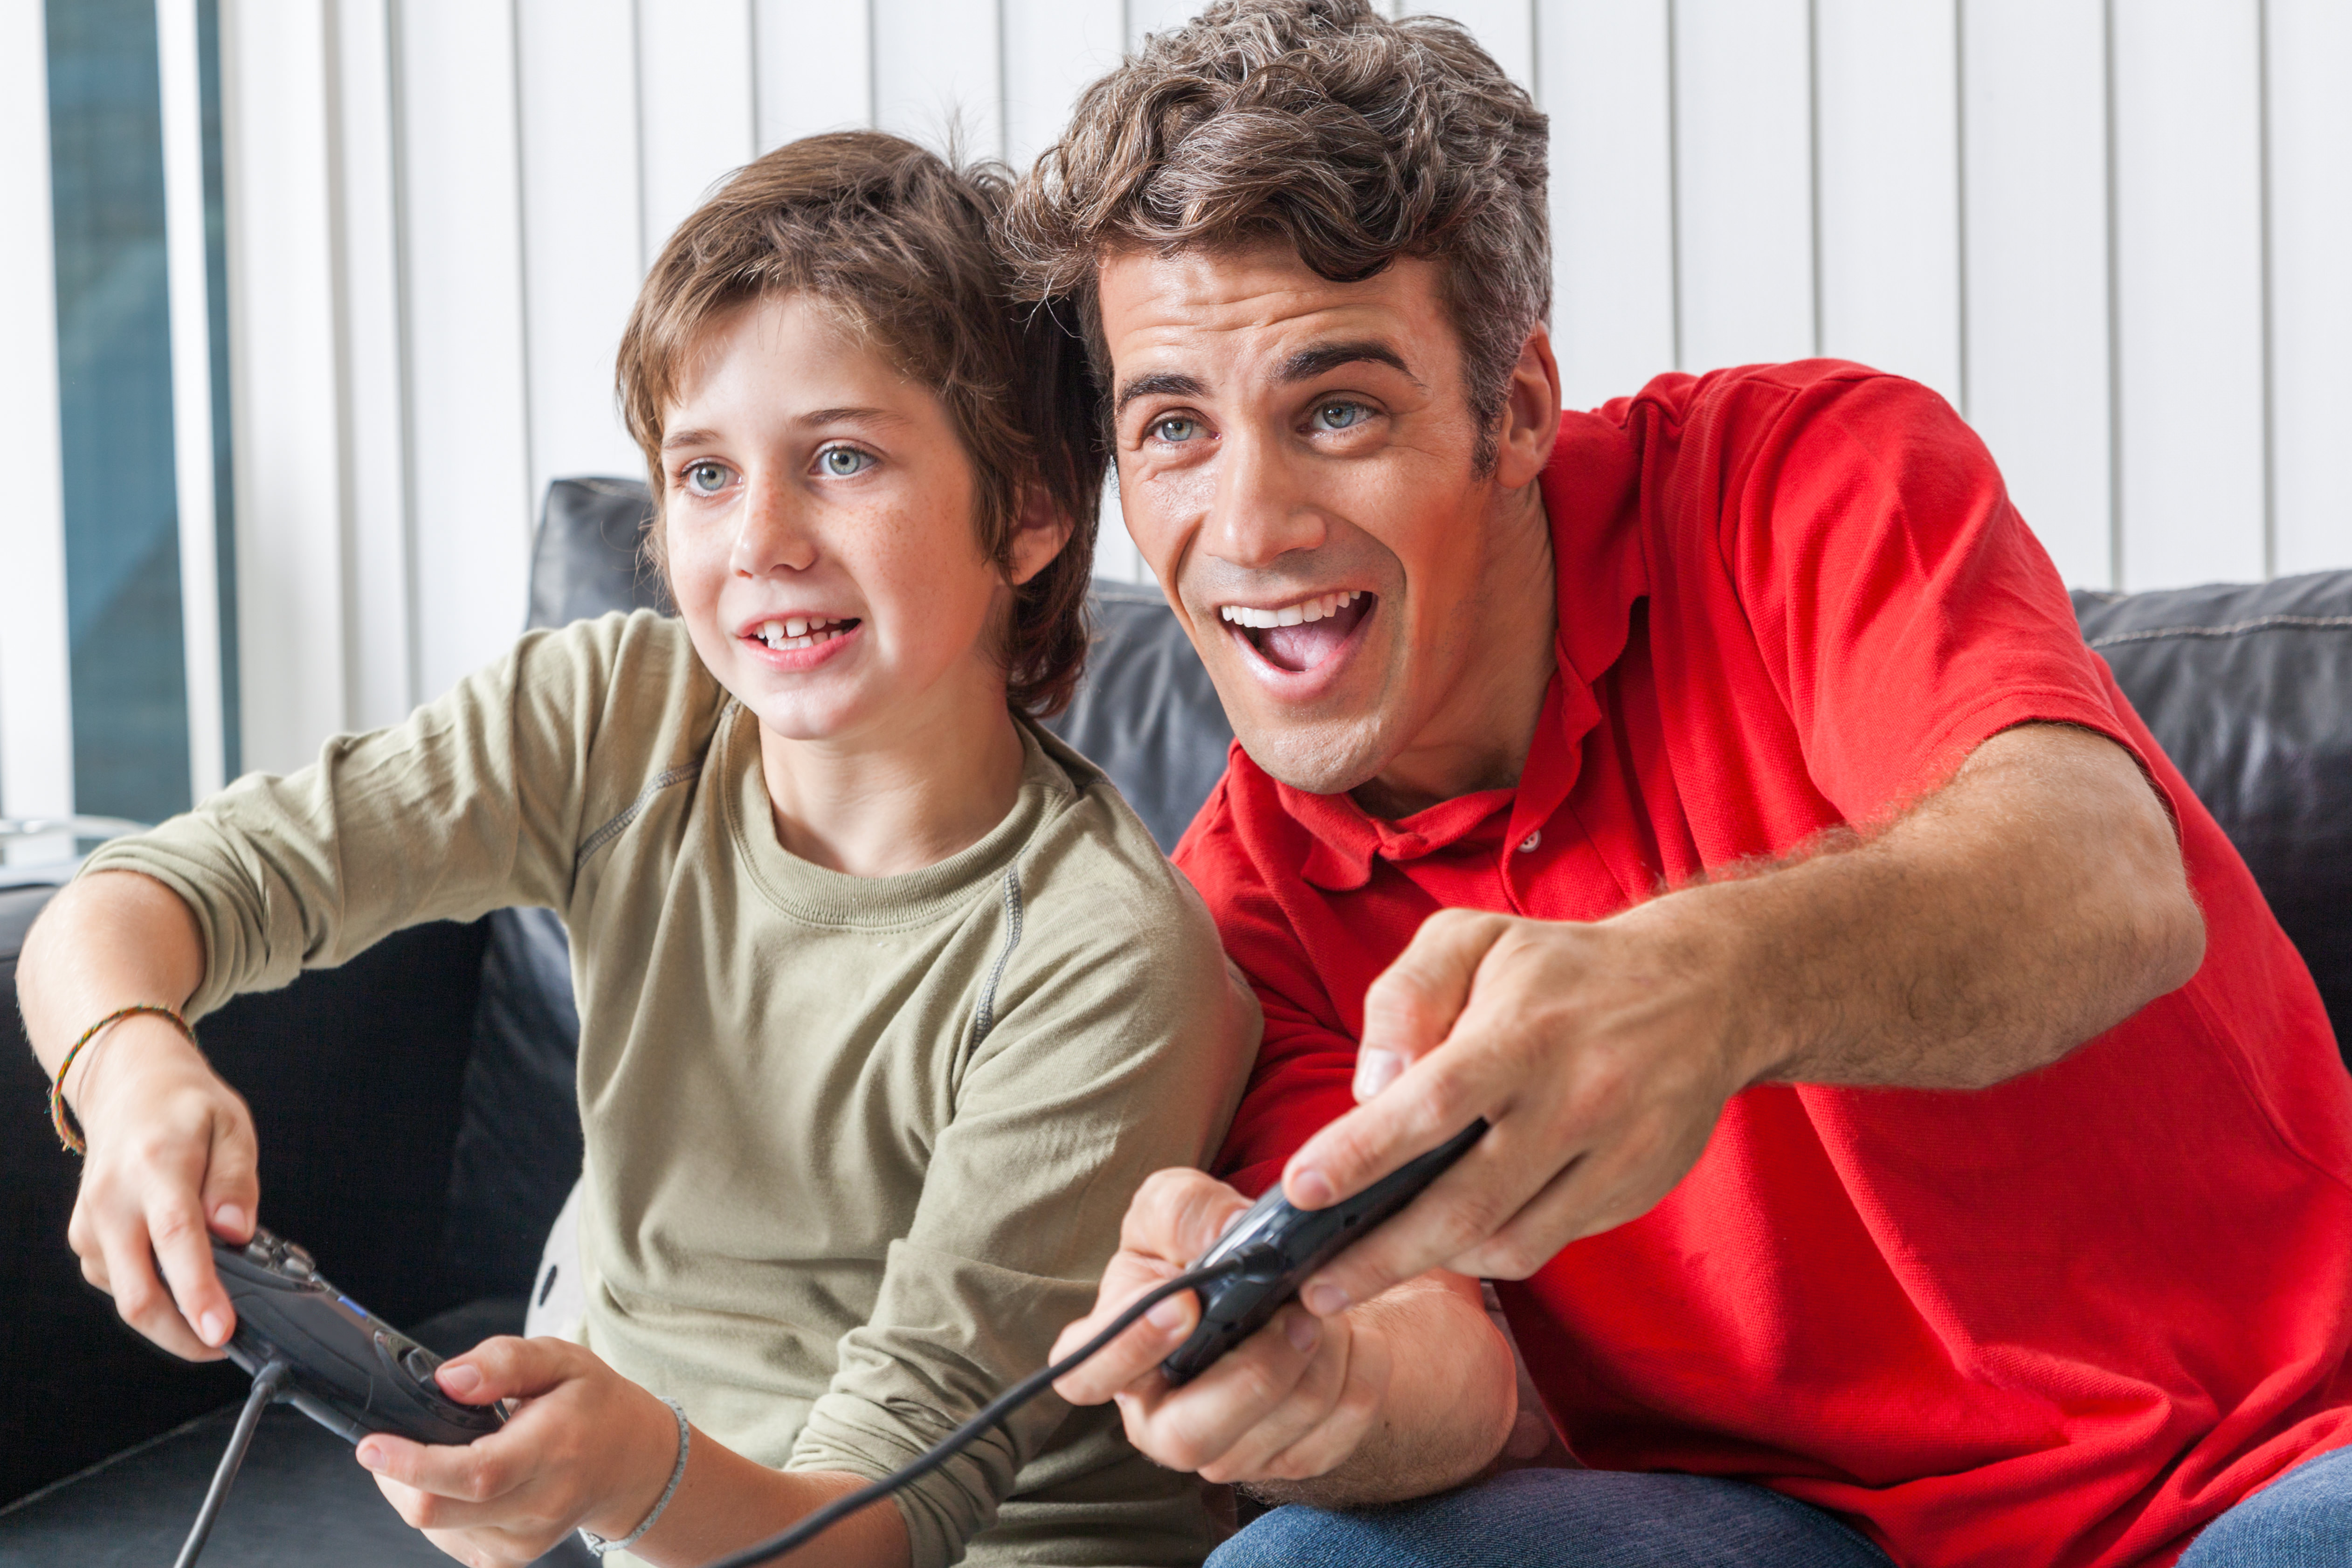 father and son playing video game, happy smile